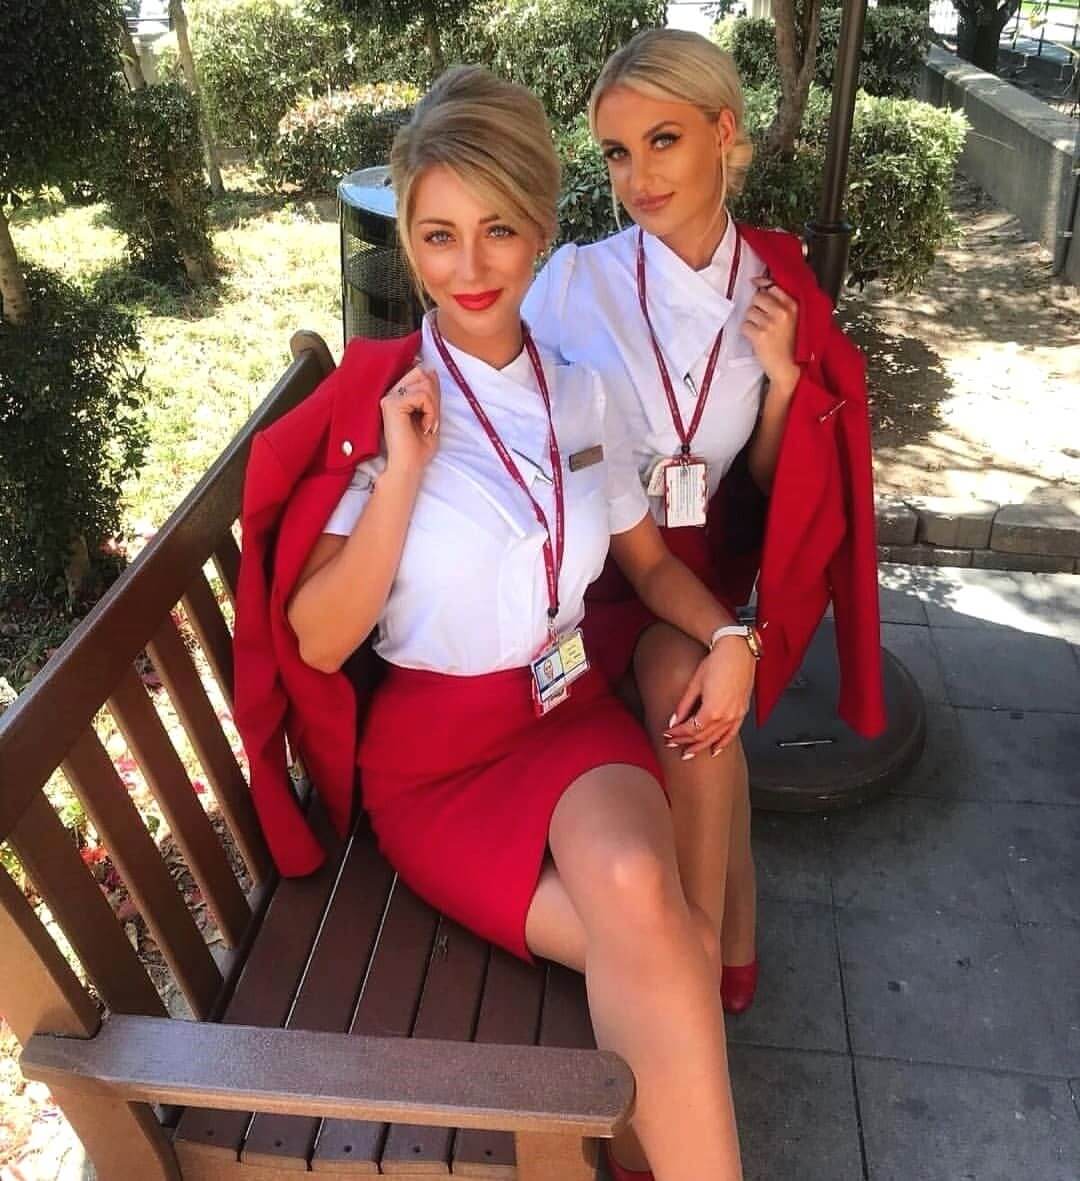 The Shockingly Raunchy Snaps Taken By Some Of Hottest Female Cabin Crew In The World! 27